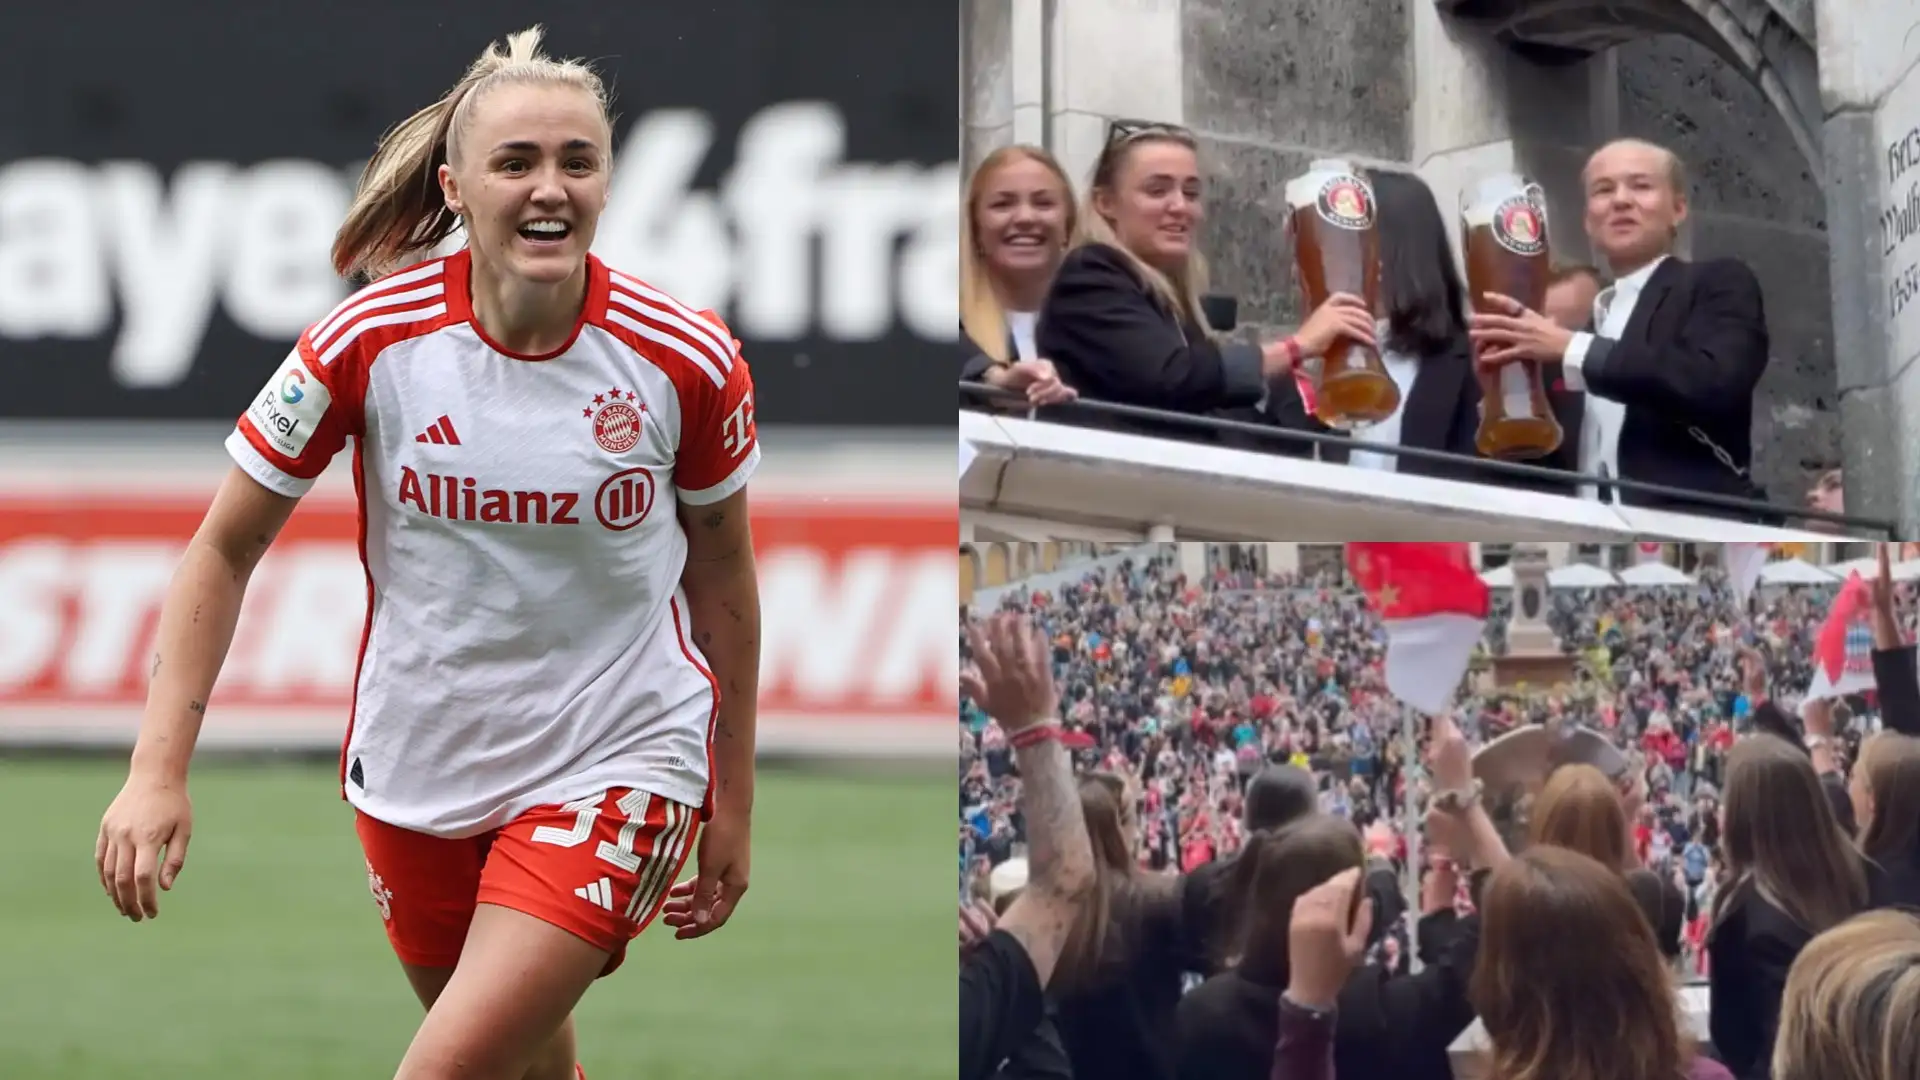 VIDEO: Lionesses star Georgia Stanway struggles to down huge German beer as she goes up against Pernille Harder during Bayern Munich's Bundesliga title celebrations